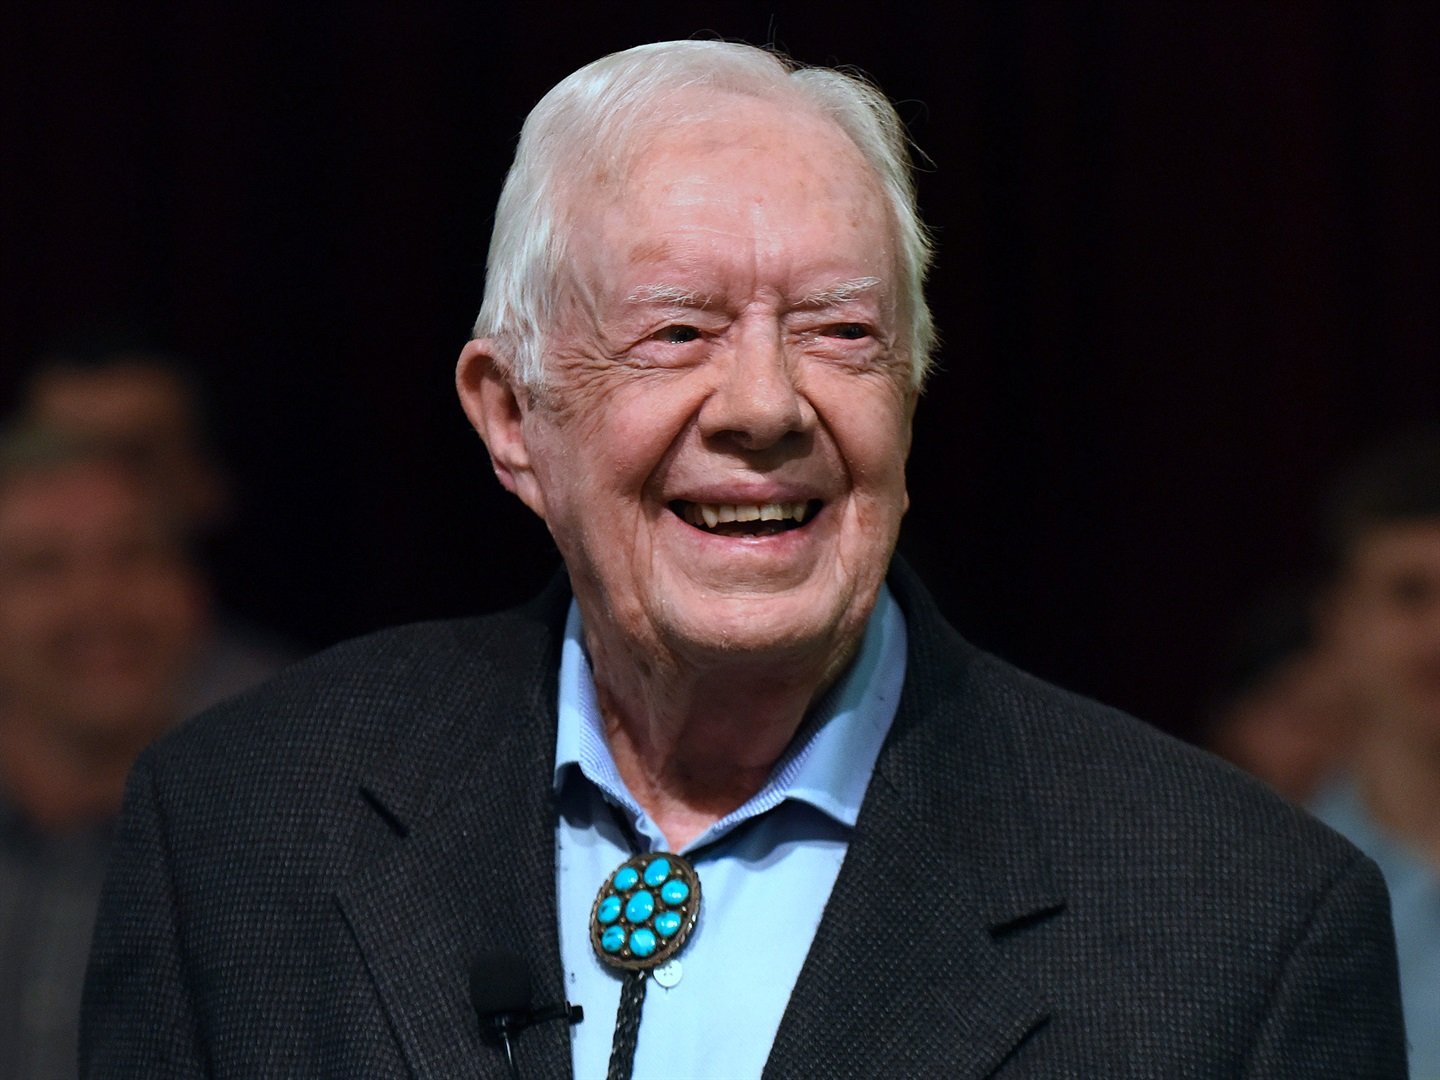 Former US President Jimmy Carter. (Paul Hennessy/NurPhoto via Getty Images)